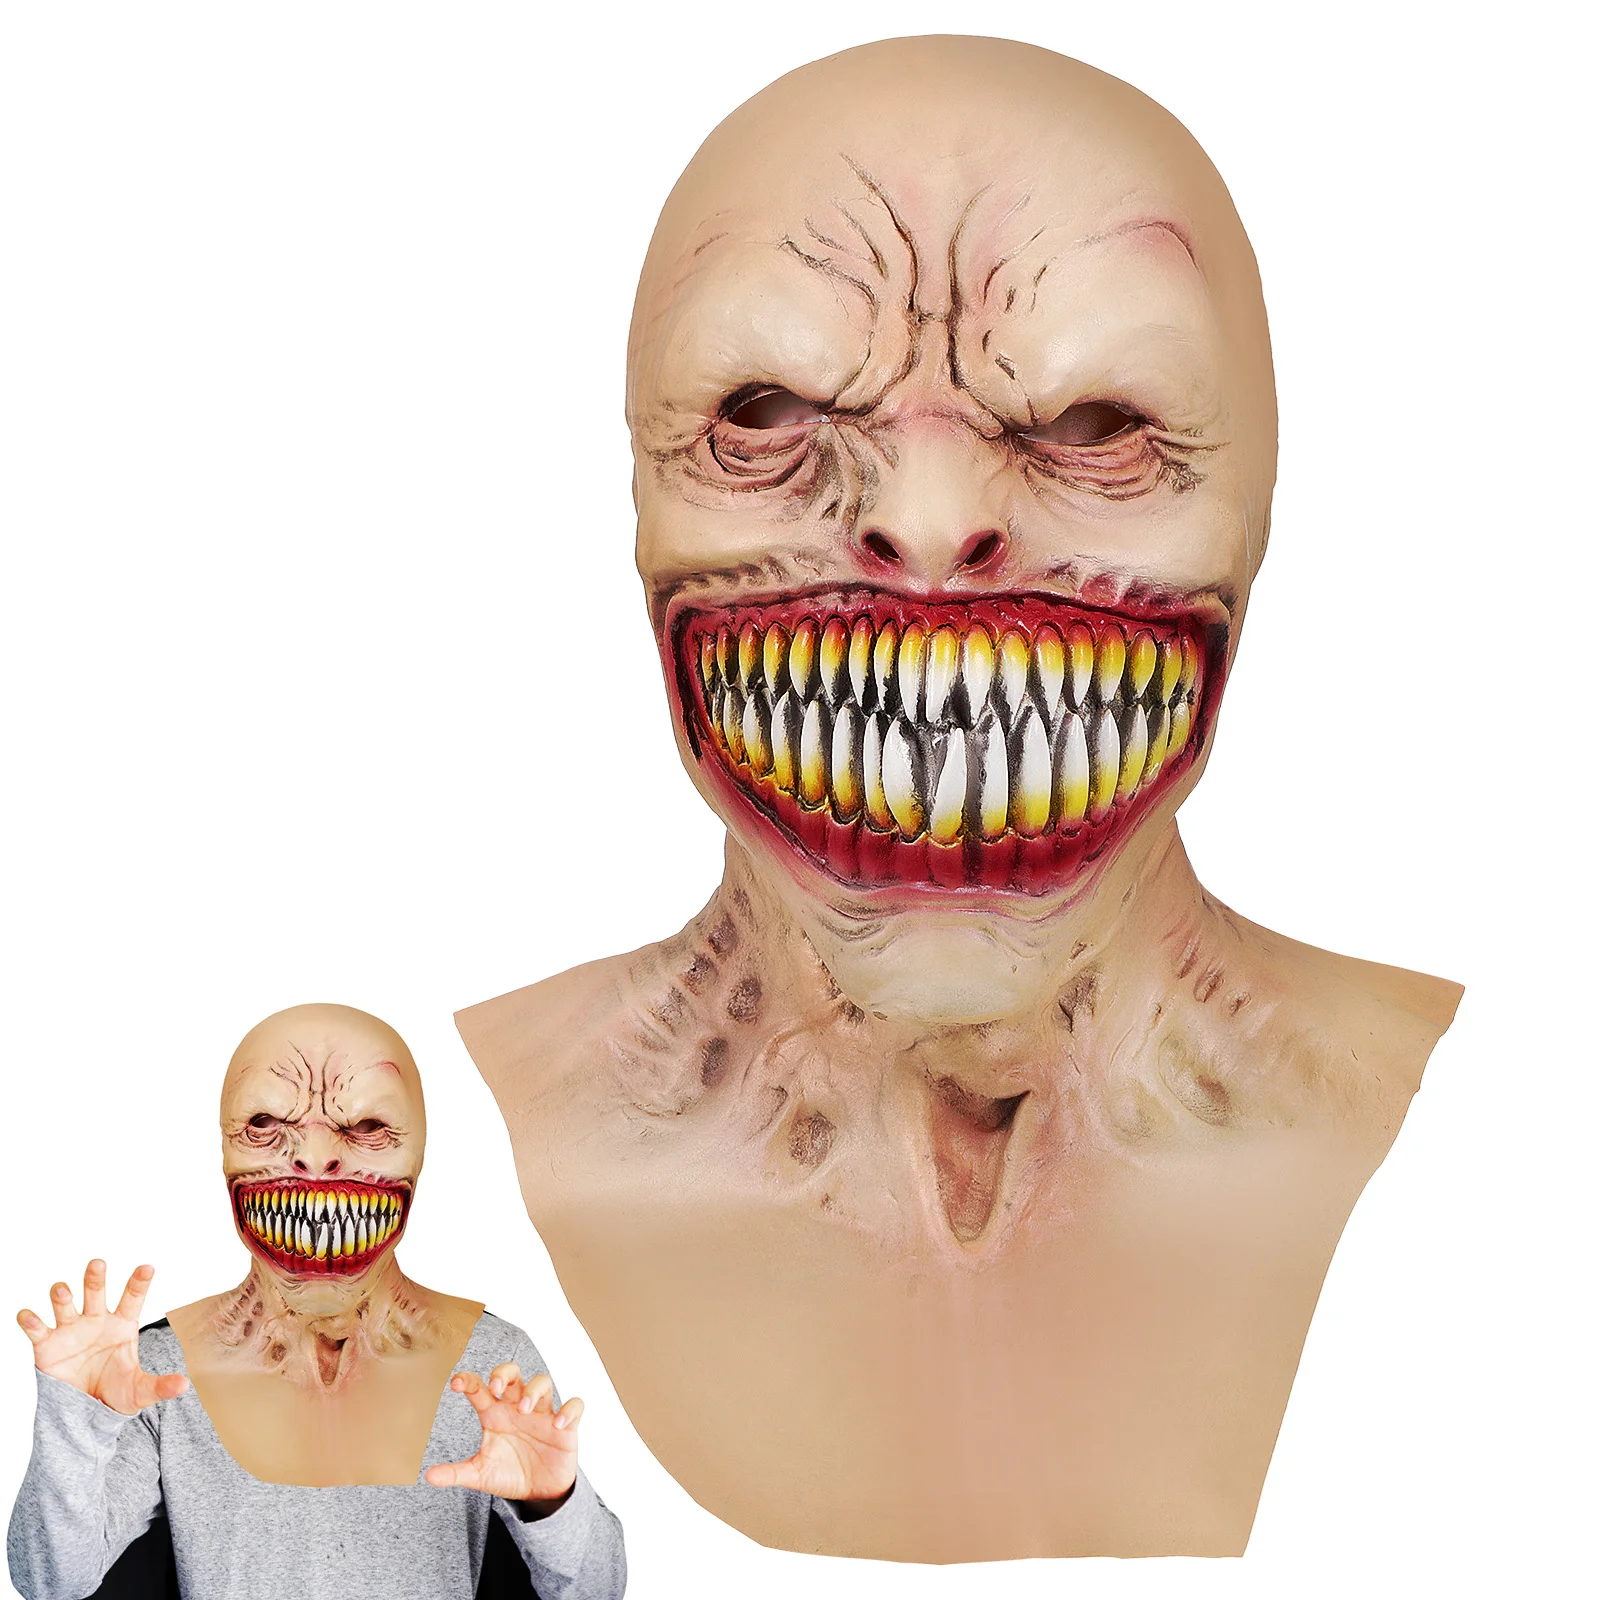 

The Mask Scary Adults Cosplay Party Supplies Halloween Women Emulsion Photo Booth Props Masks Horror Realistic